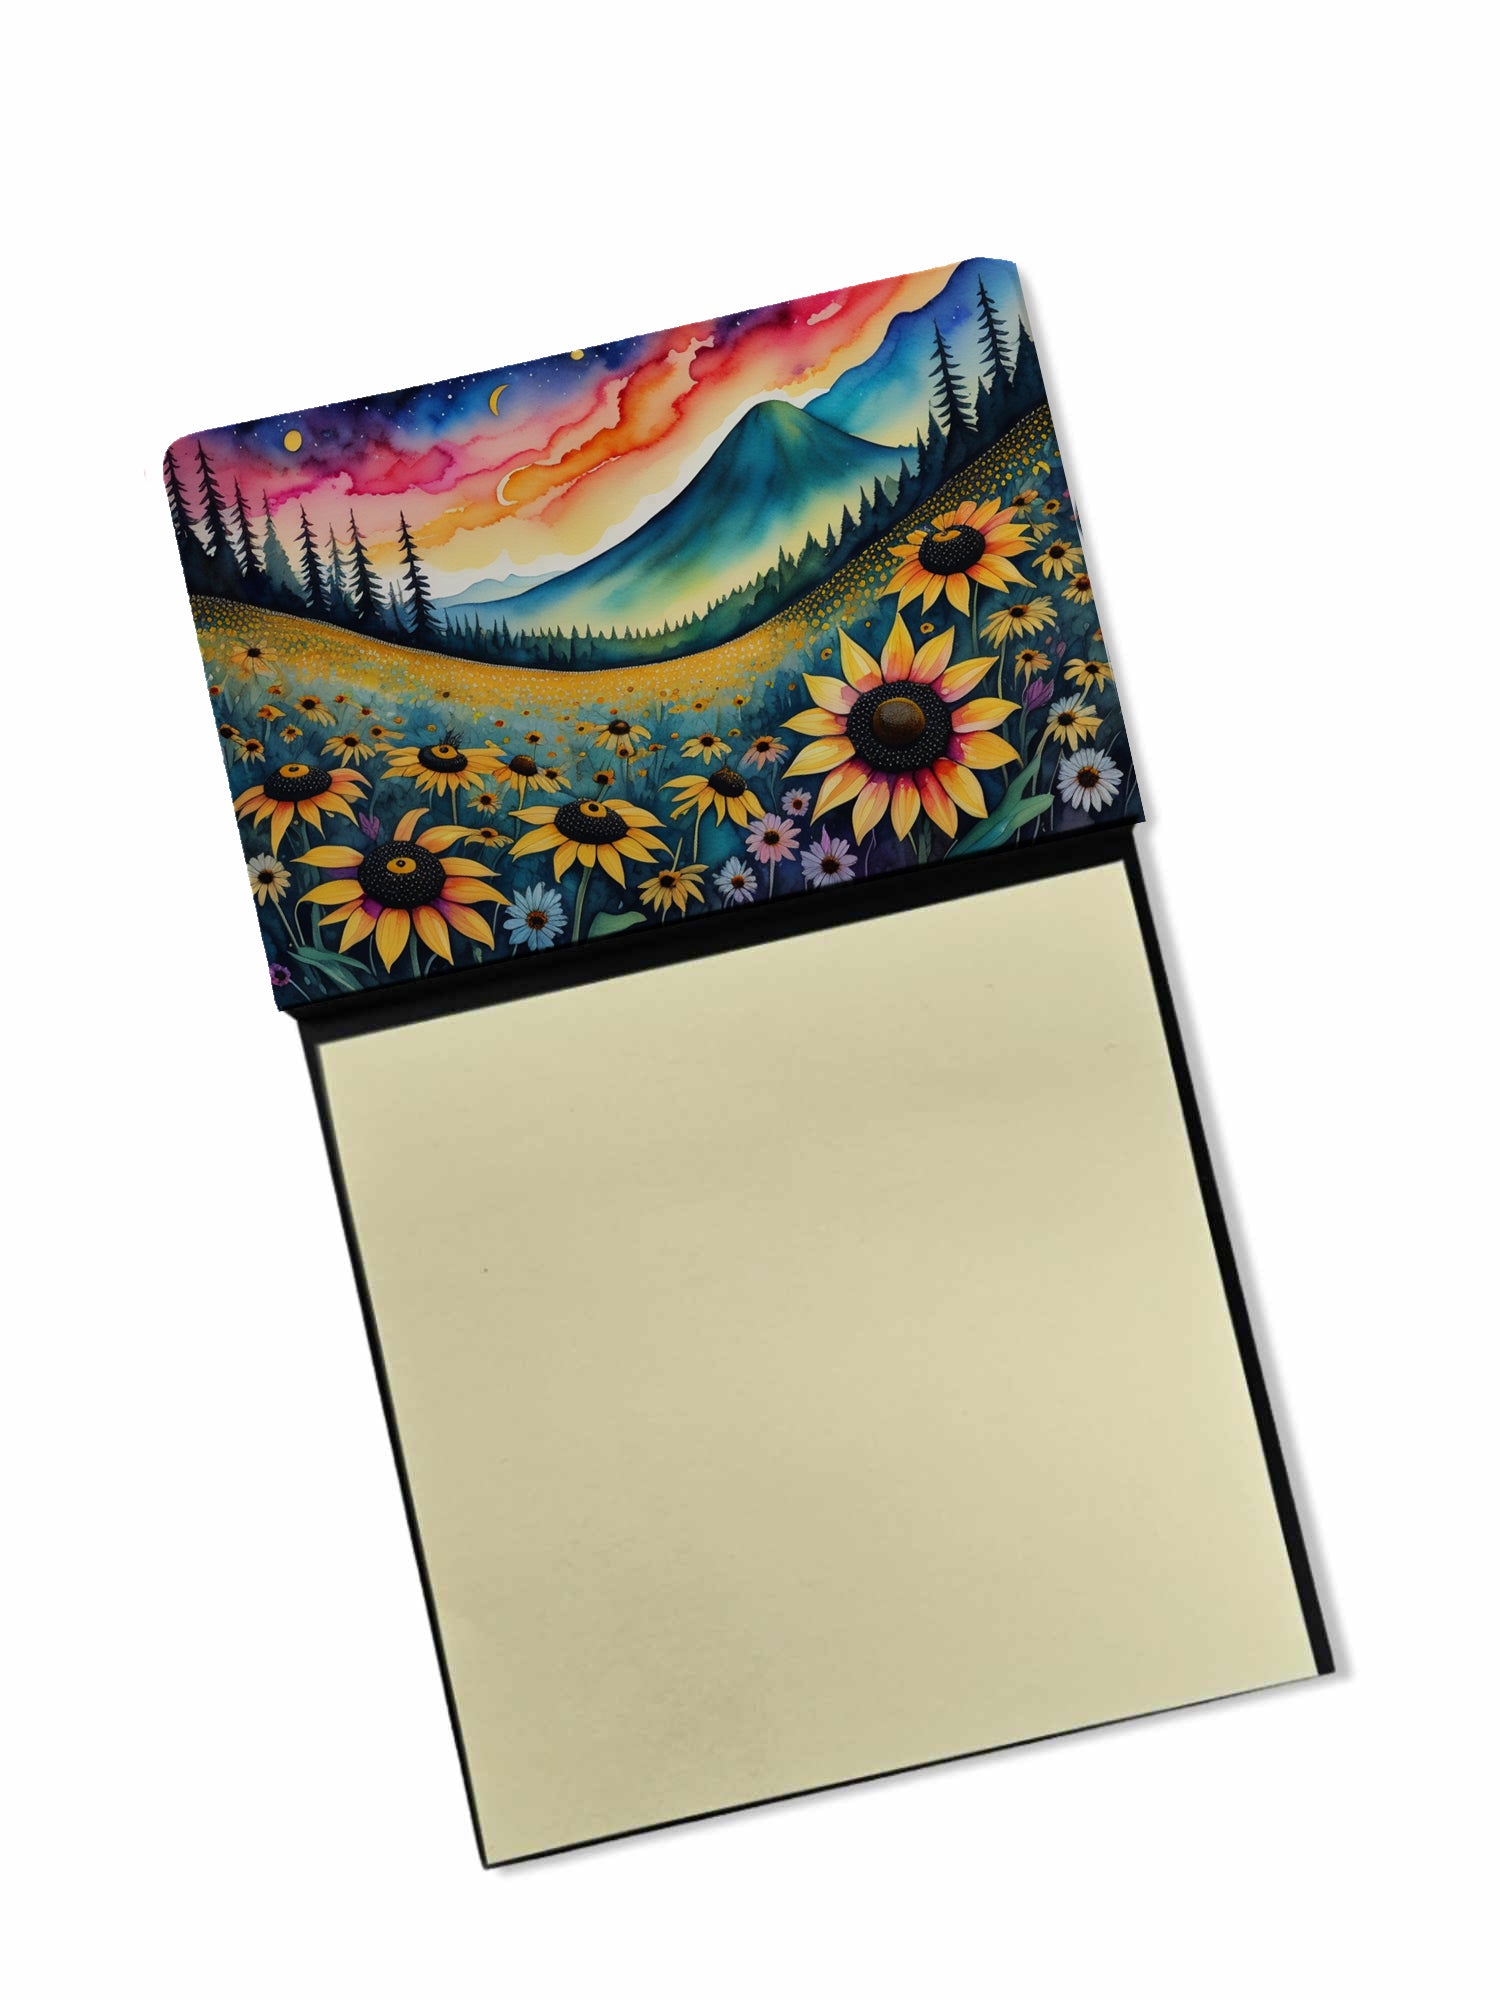 Buy this Black-eyed Susans in Color Sticky Note Holder